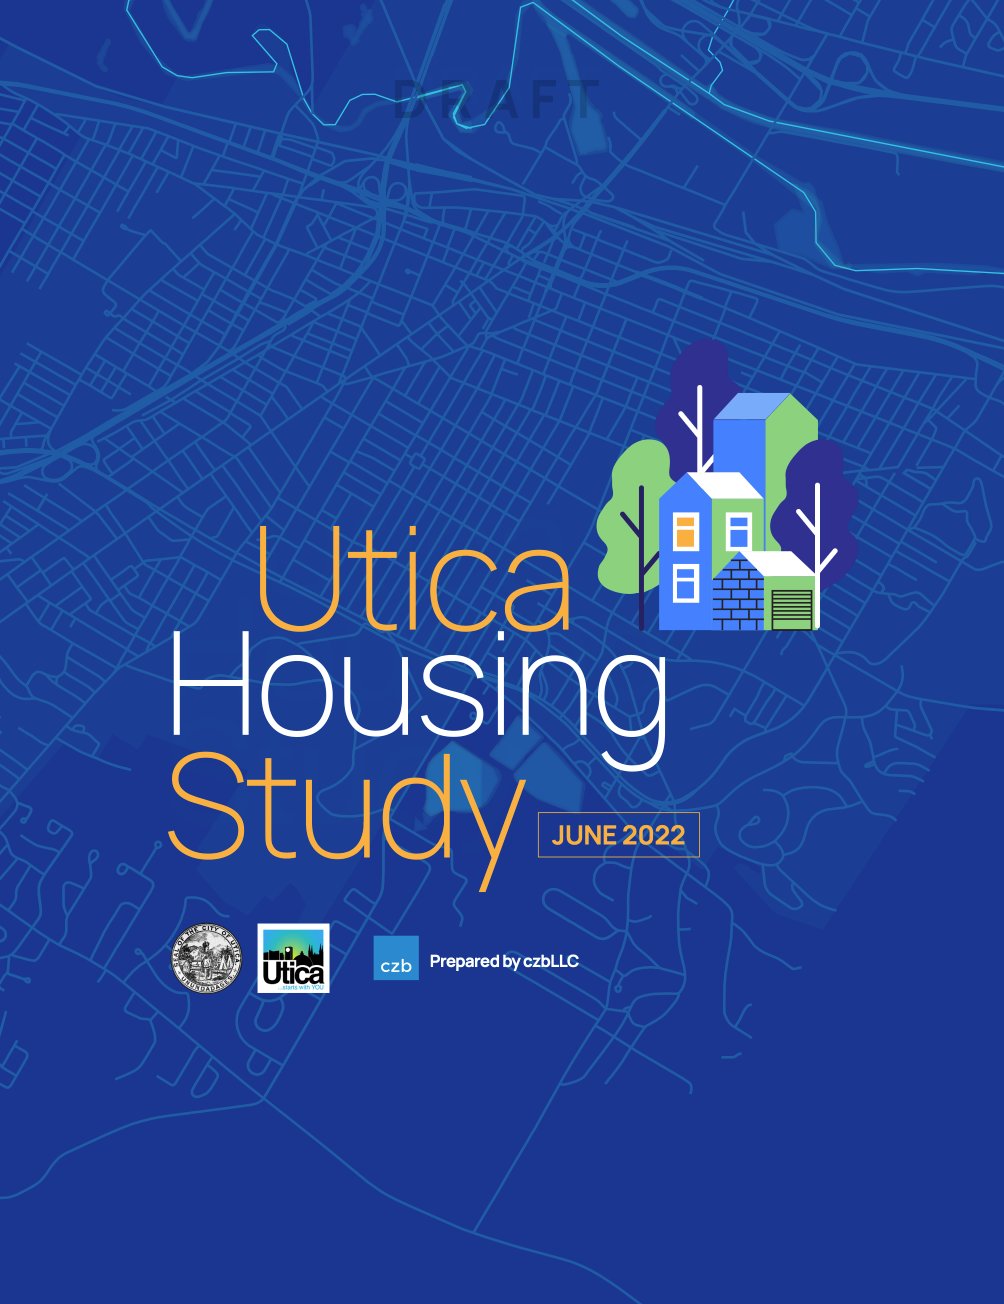 City of Utica officials encourage residents to review the new housing study and to submit any questions or feedback. The form to submit public input will be open until June 30. To review the Utica Housing Study and to provide any questions or feedback, visit: uticahousingstudy.org.